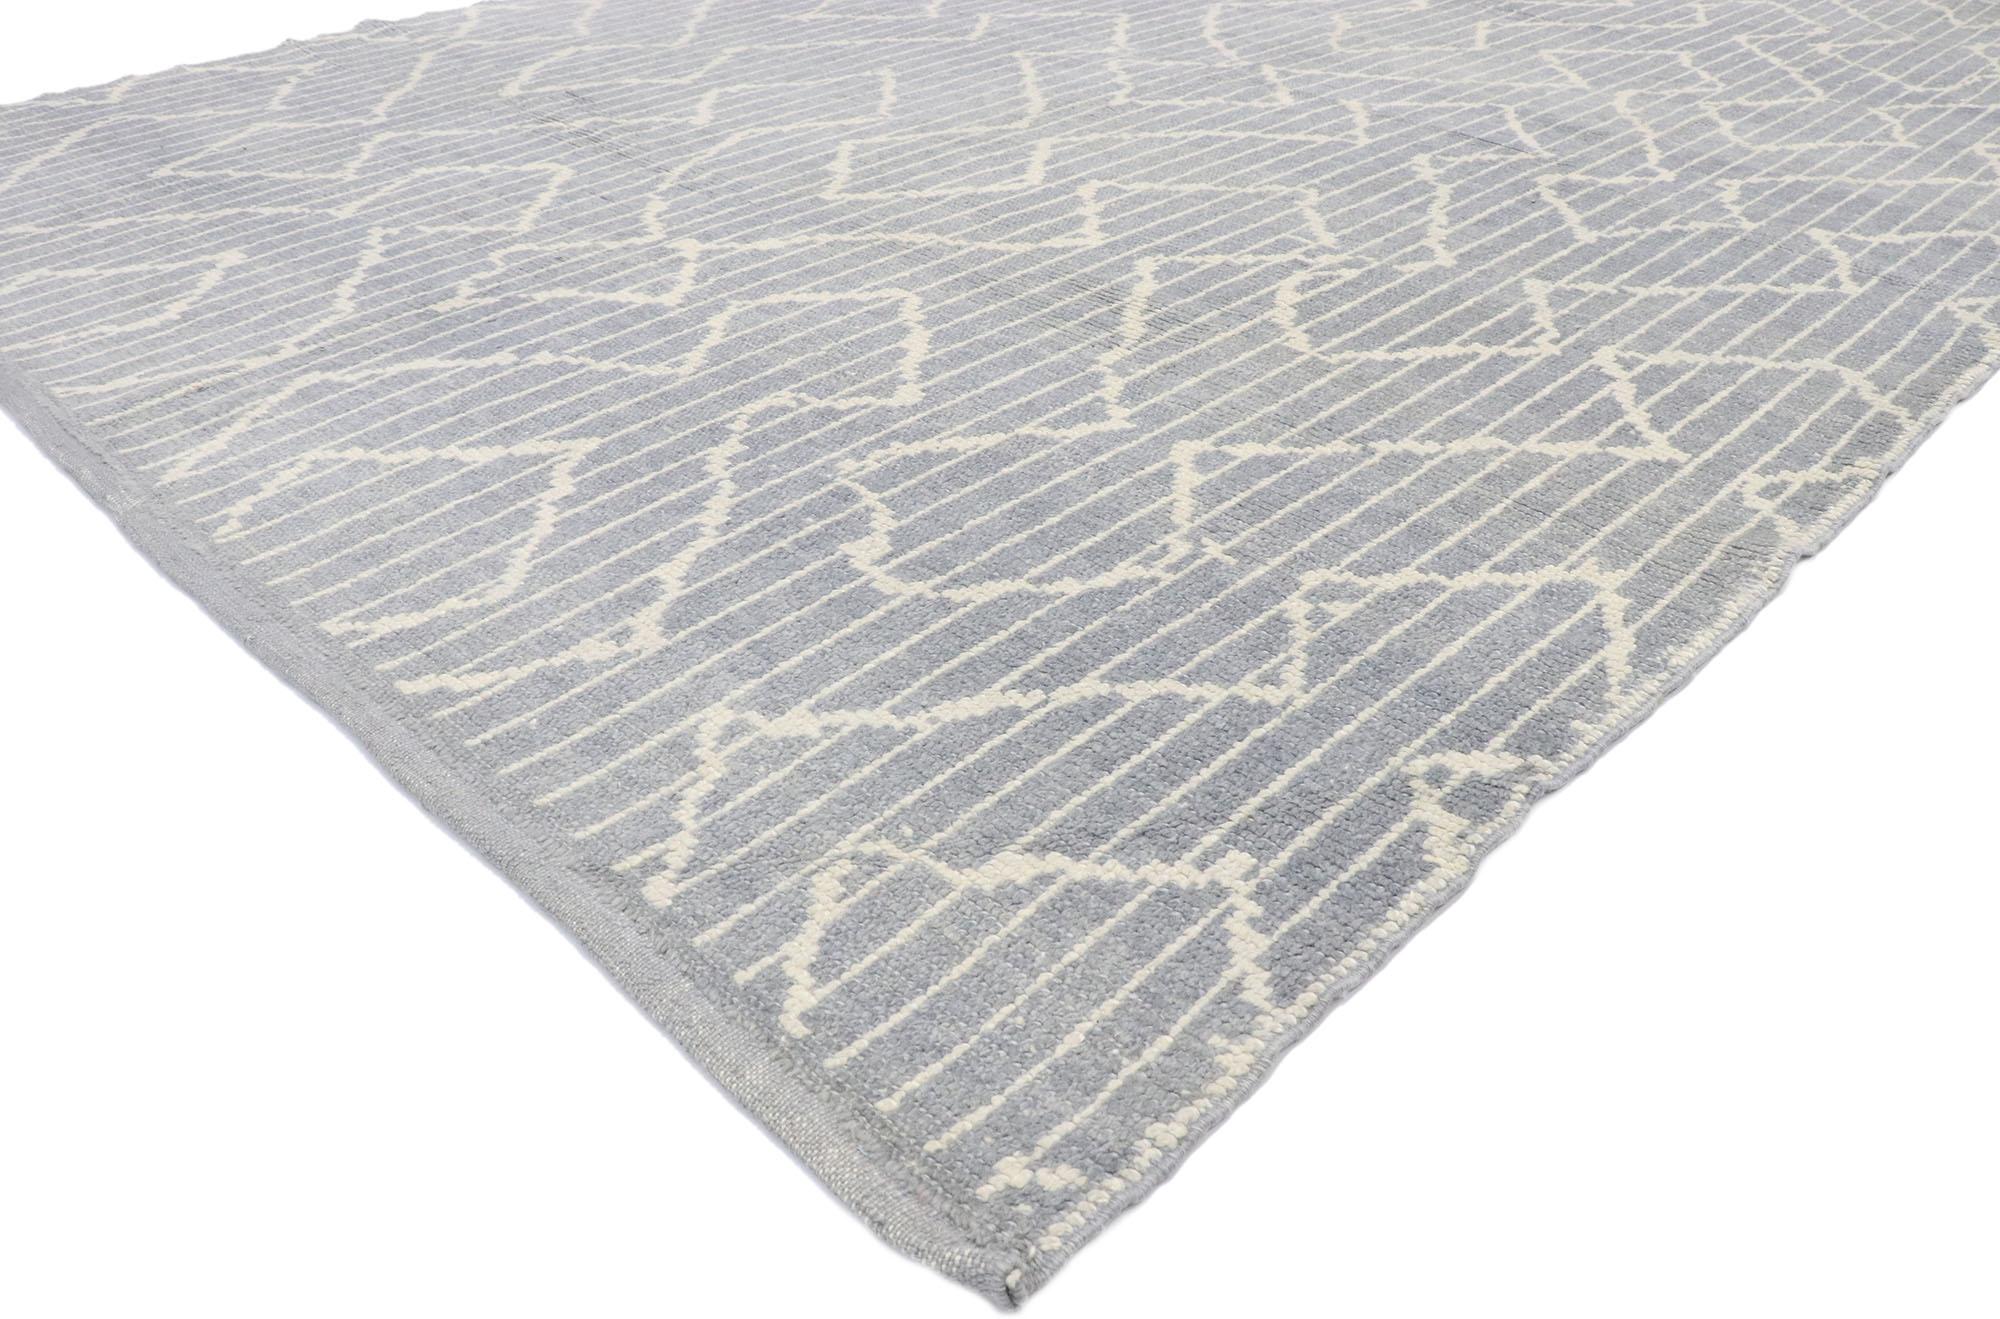 53442, new contemporary Moroccan style rug with tribal design. Luminous bluish-grey hues and rich waves of abrash create an endless fascinating effect in this hand knotted wool contemporary Moroccan style area rug. Vertical beige lines run the